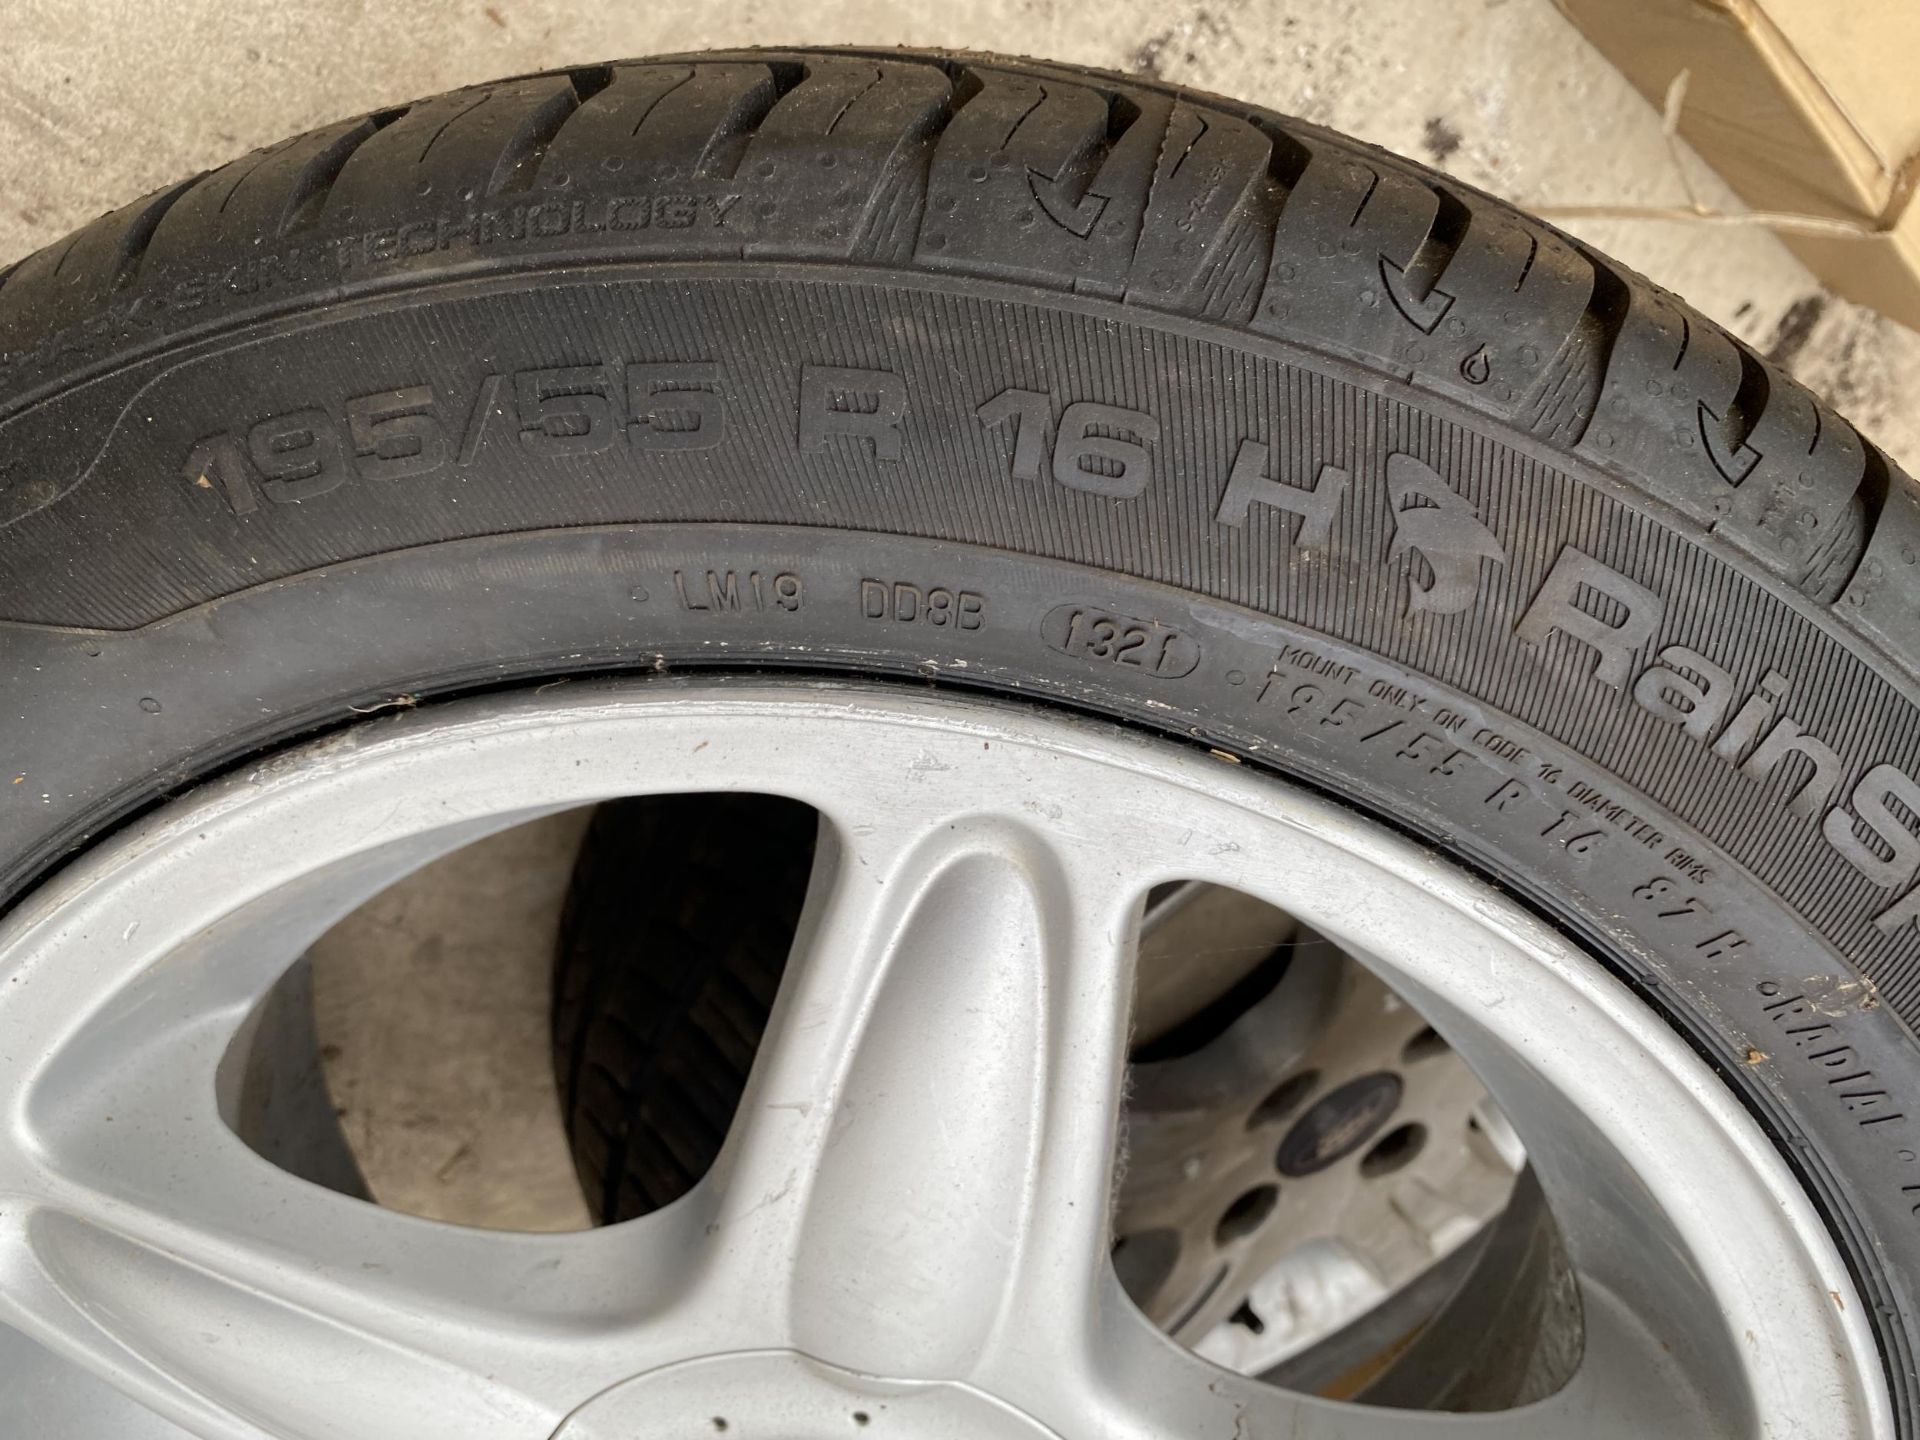 TWO MINI ALLOY WHEELS WITH 195/55 R16 TYRES - Image 3 of 4